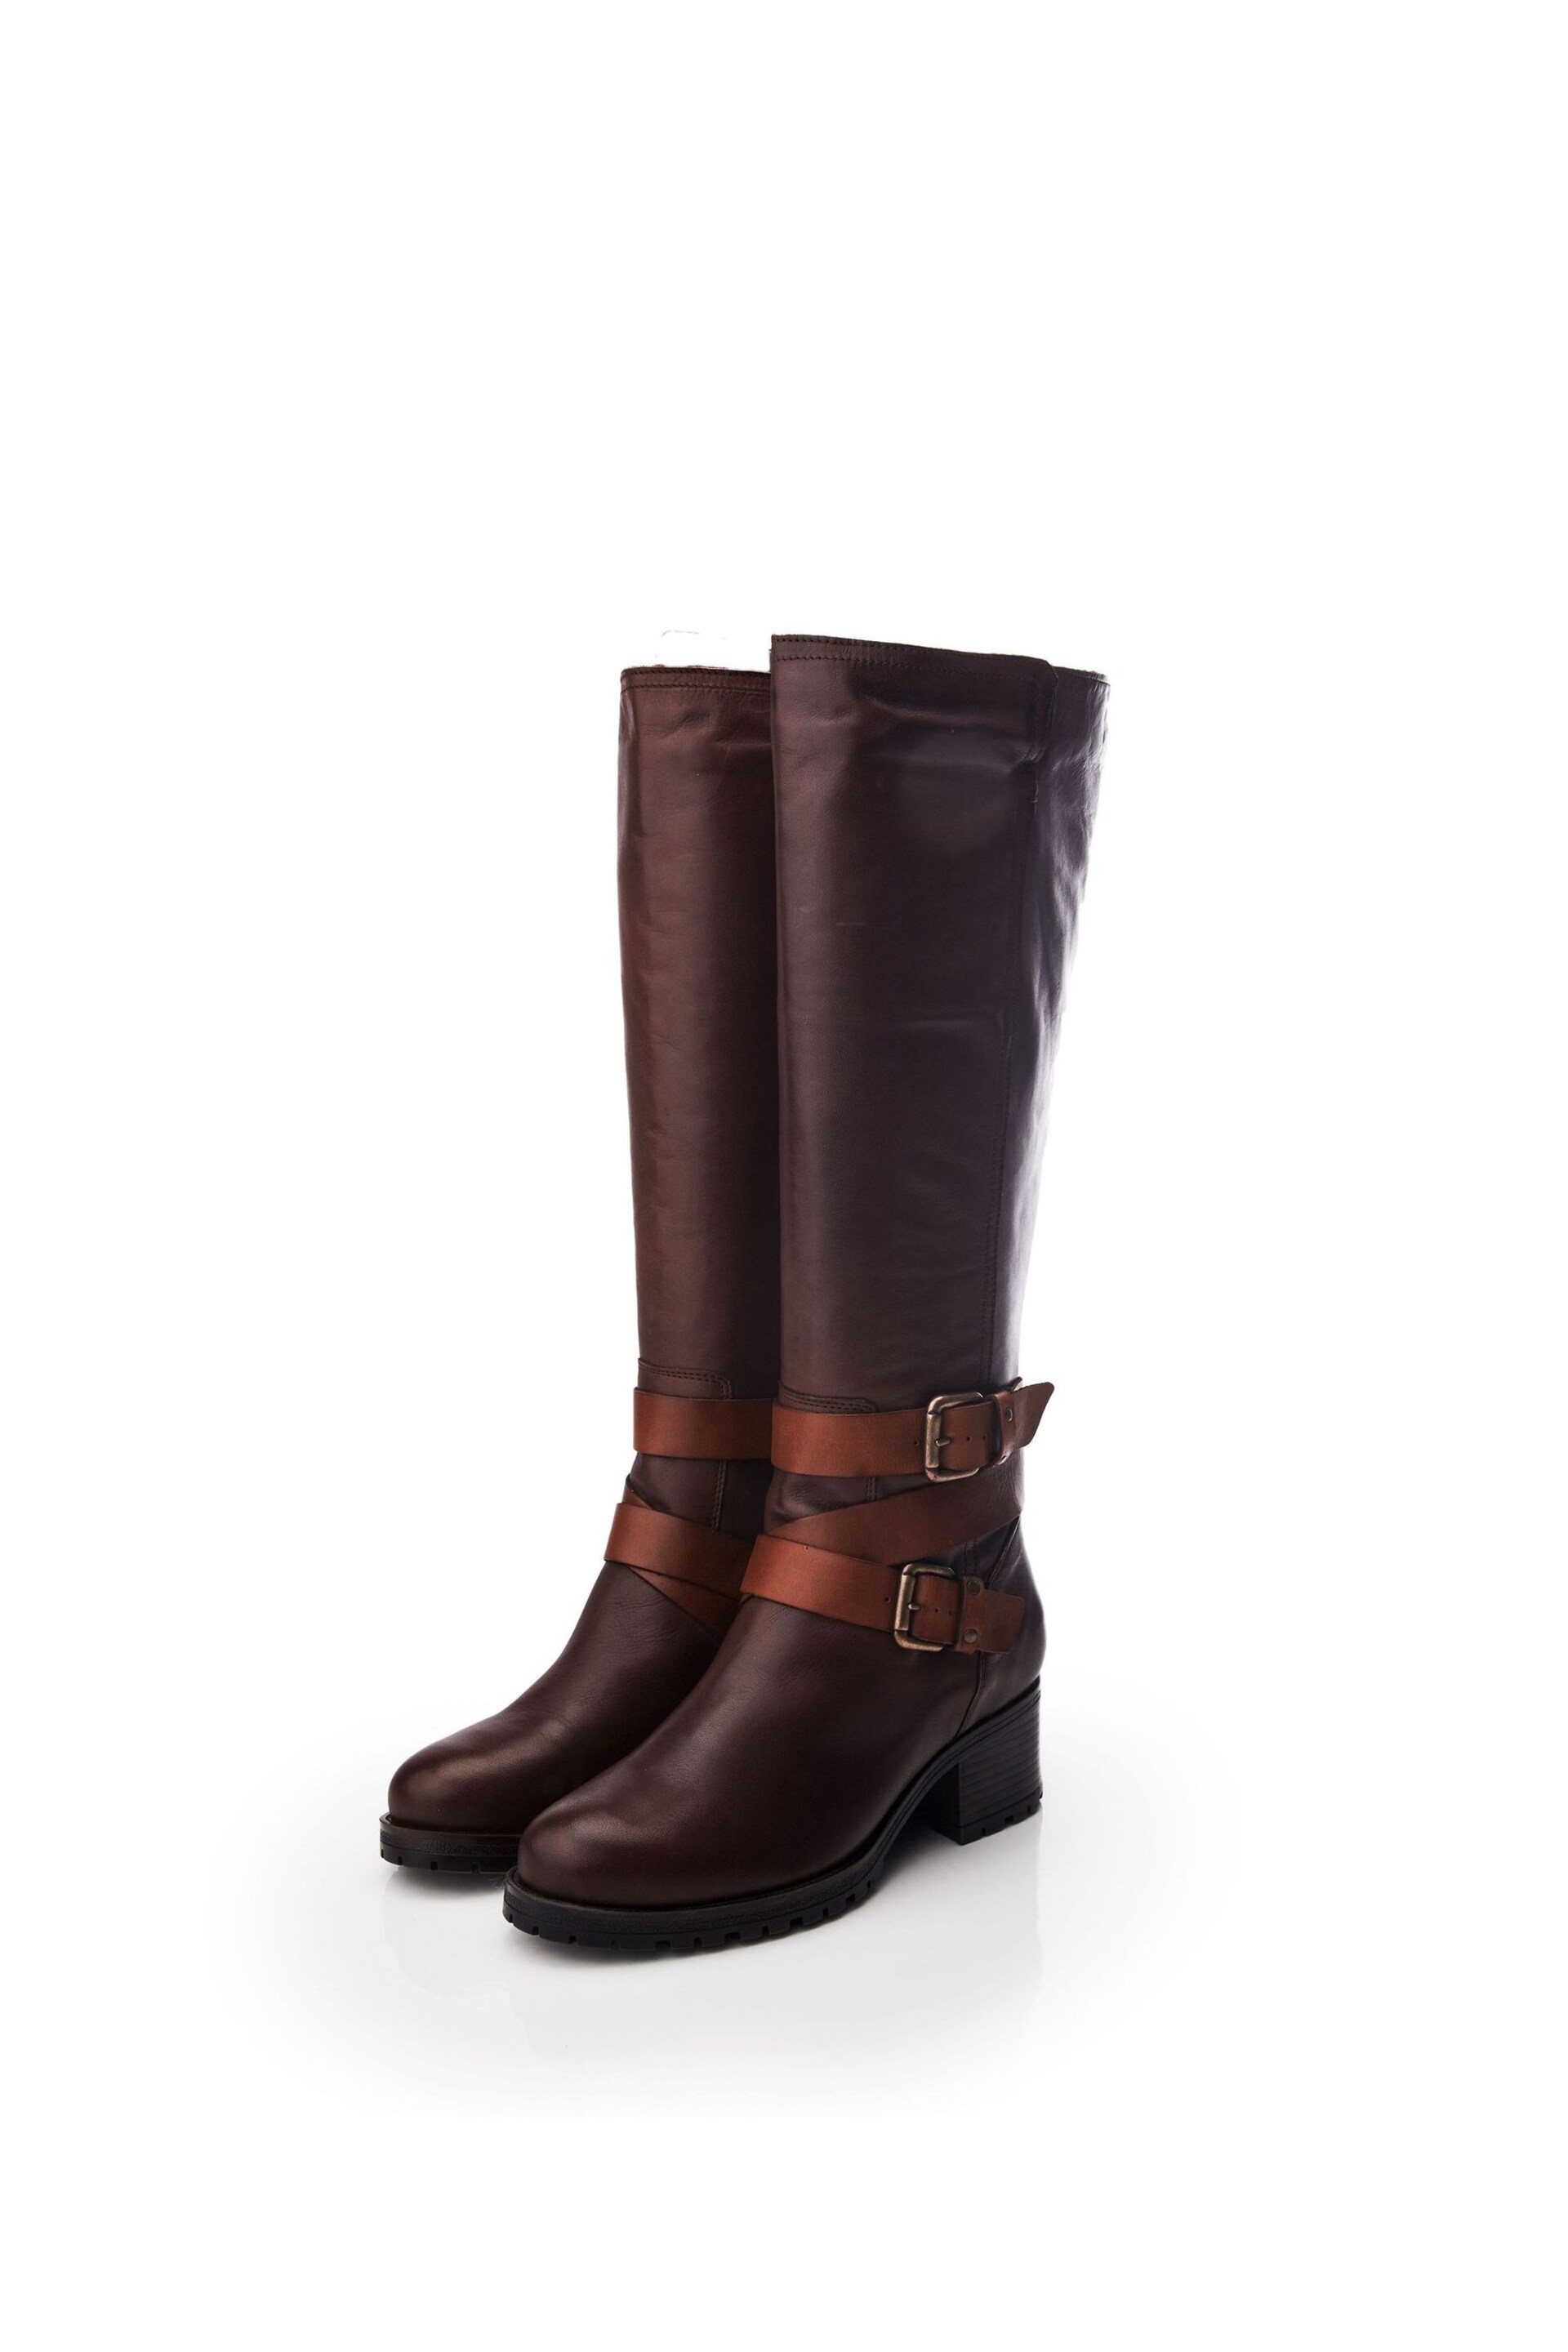 Moda in Pelle 	Brown Hadleigh Buckle Detail Chunky Long Boots - Image 2 of 3